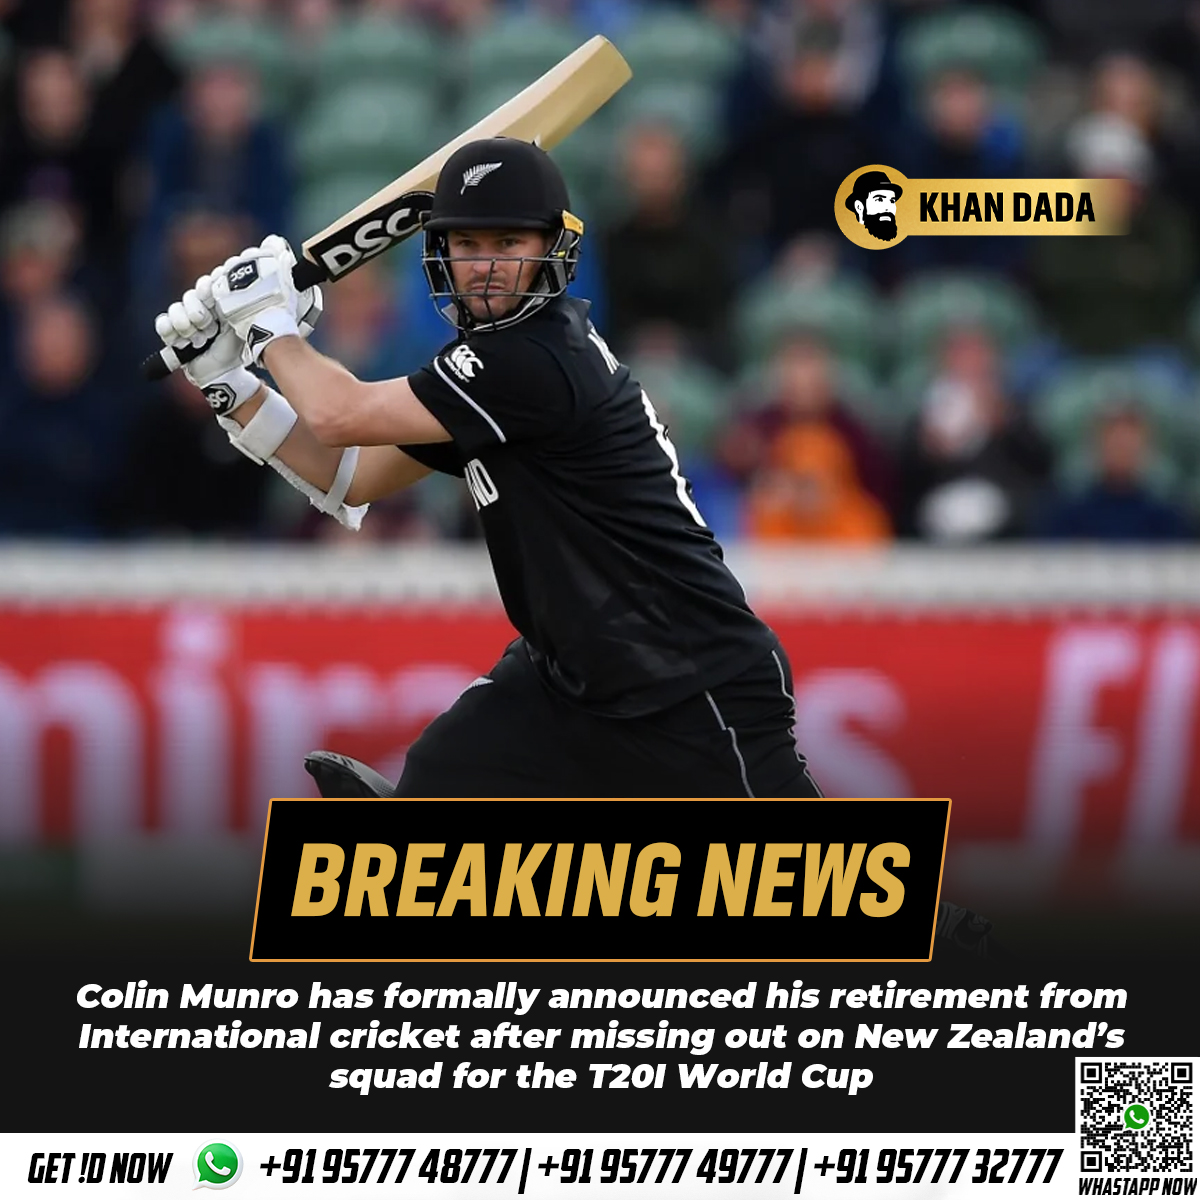 The 37-year-old has represented New Zealand in one Test, 57 ODIs, and 65 T20Is. In those games, he has amassed 3010 runs at bat, including three hundreds and nineteen half-centuries.😎👏 #ColinMunro #NewZealandCricket #LucknowSuperGiants #RahulDravid #Bhai #BayerLeverkusen #Pune